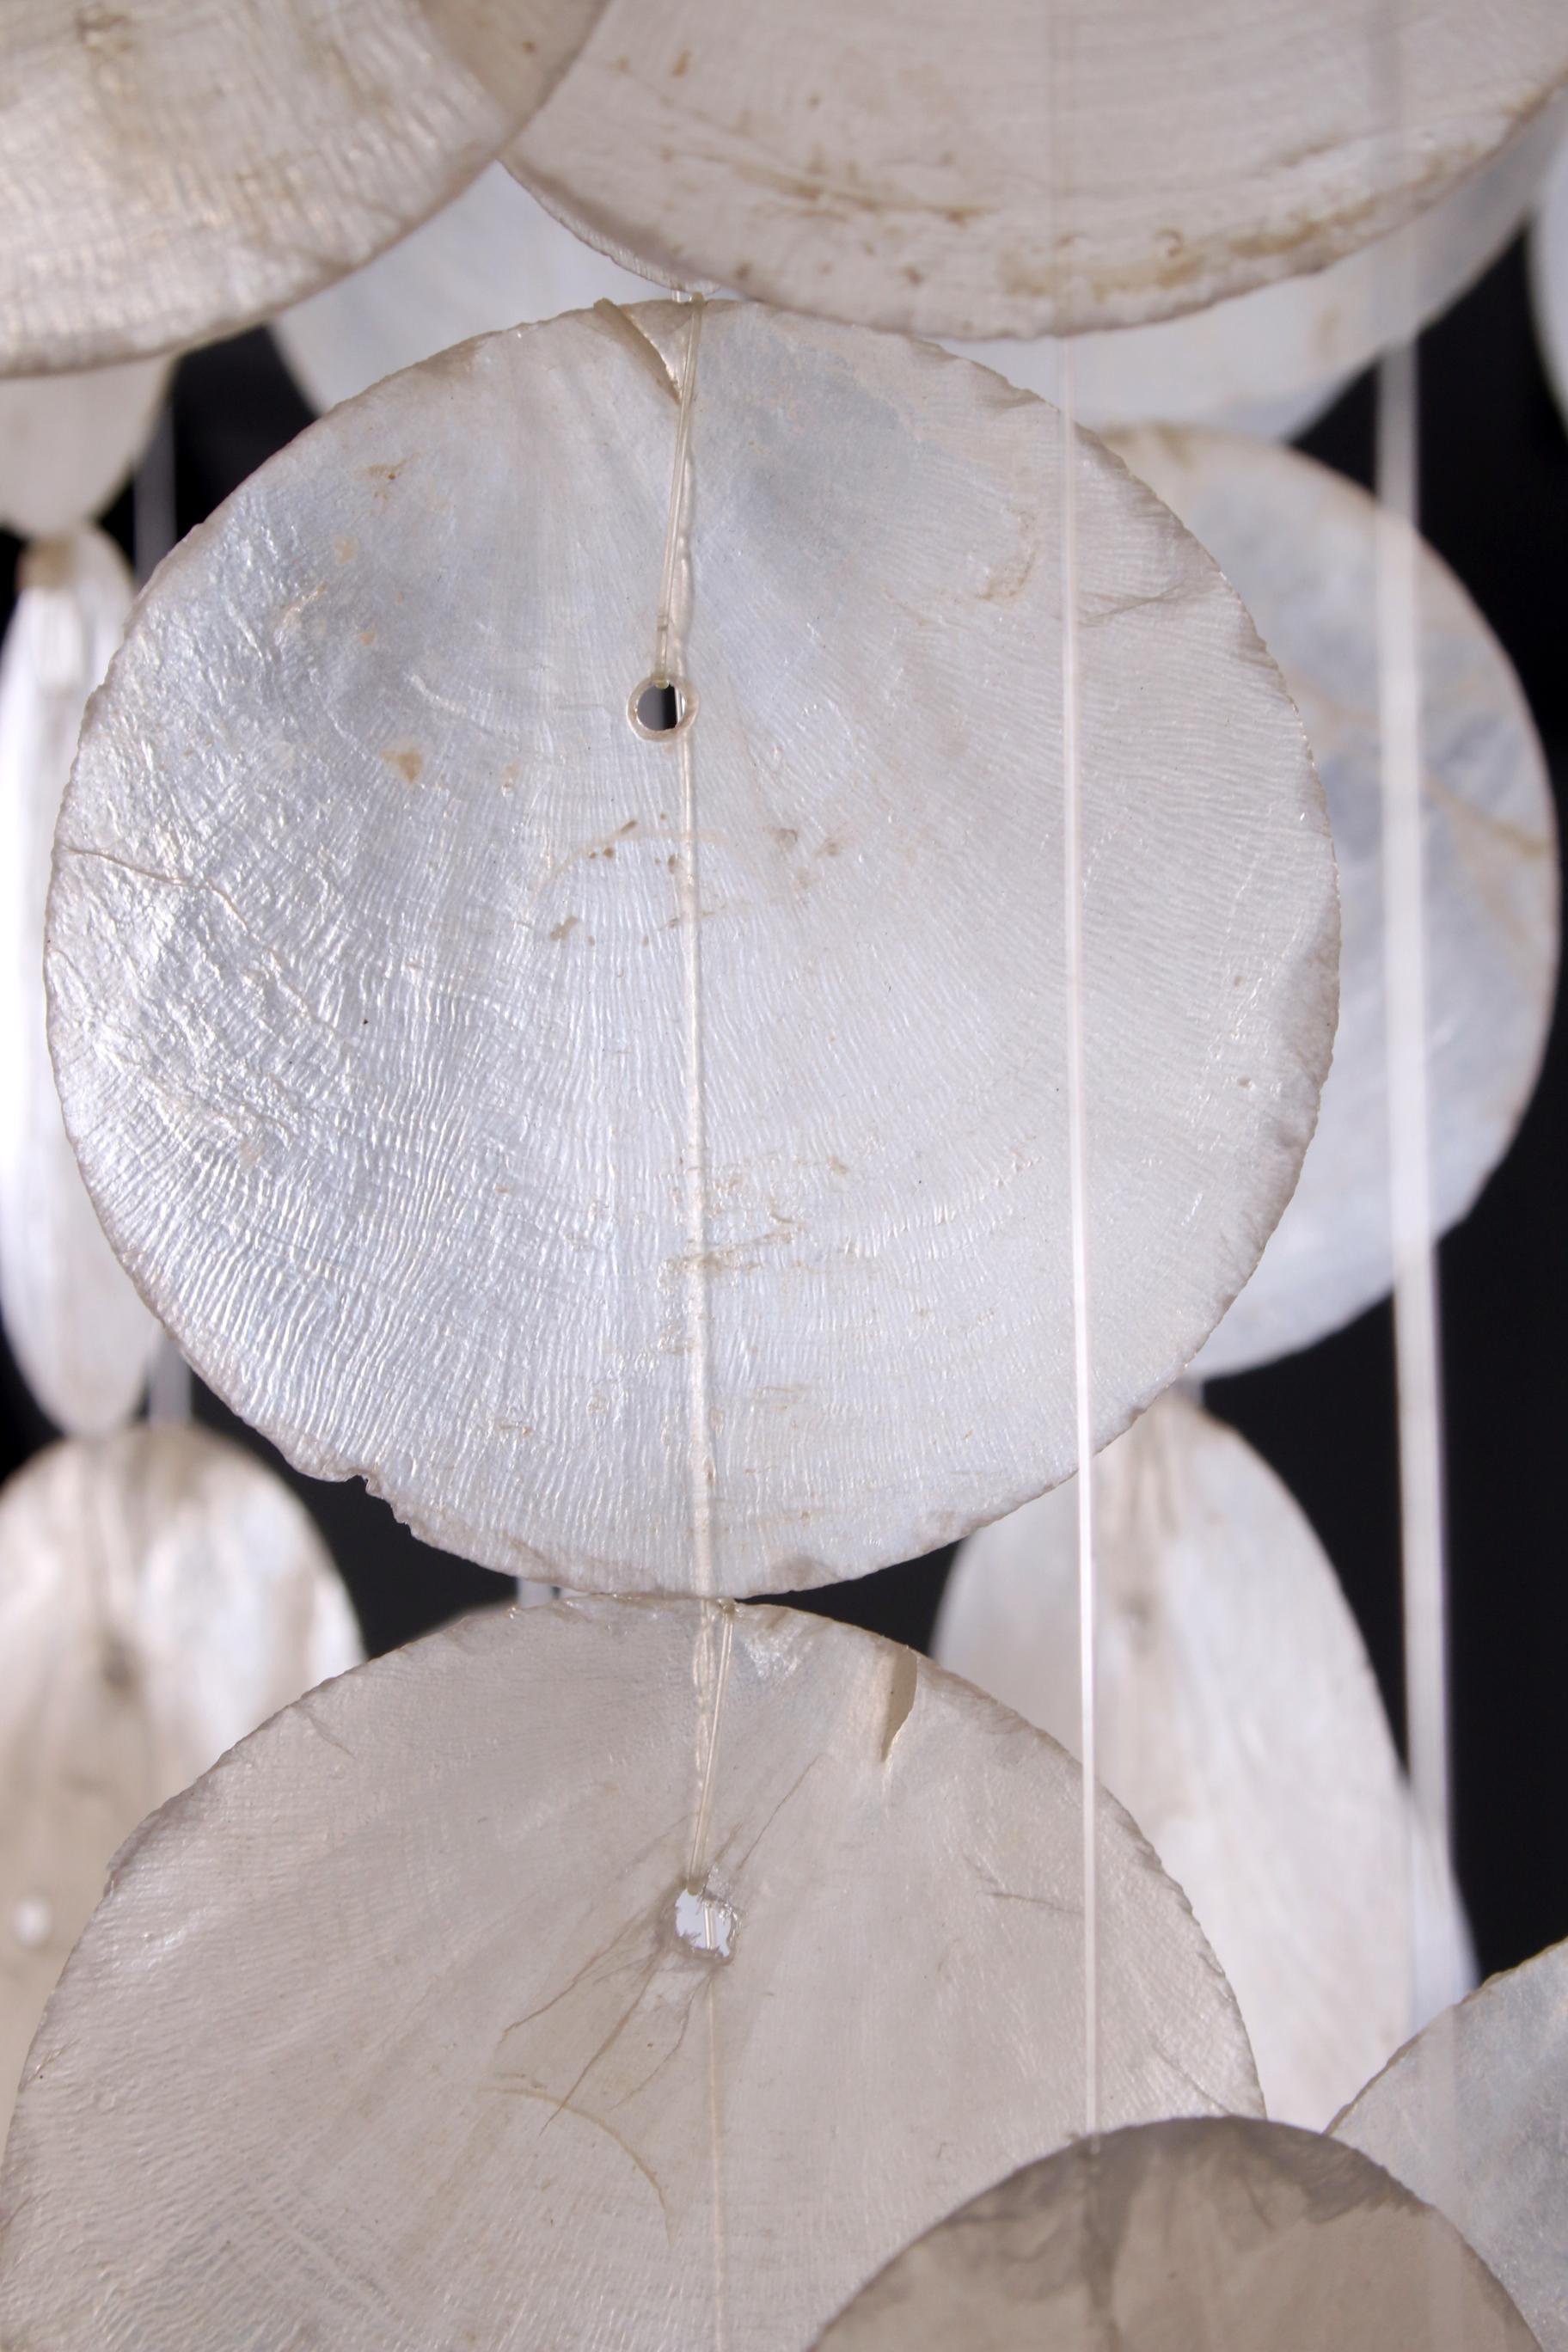 With this beautiful vintage shell storm catcher in the style of Verner Panton you imagine yourself in tropical atmospheres. This shell hanging wind catcher gives 'a kind of' holiday feeling in your interior, a real vintage eye-catcher that fits